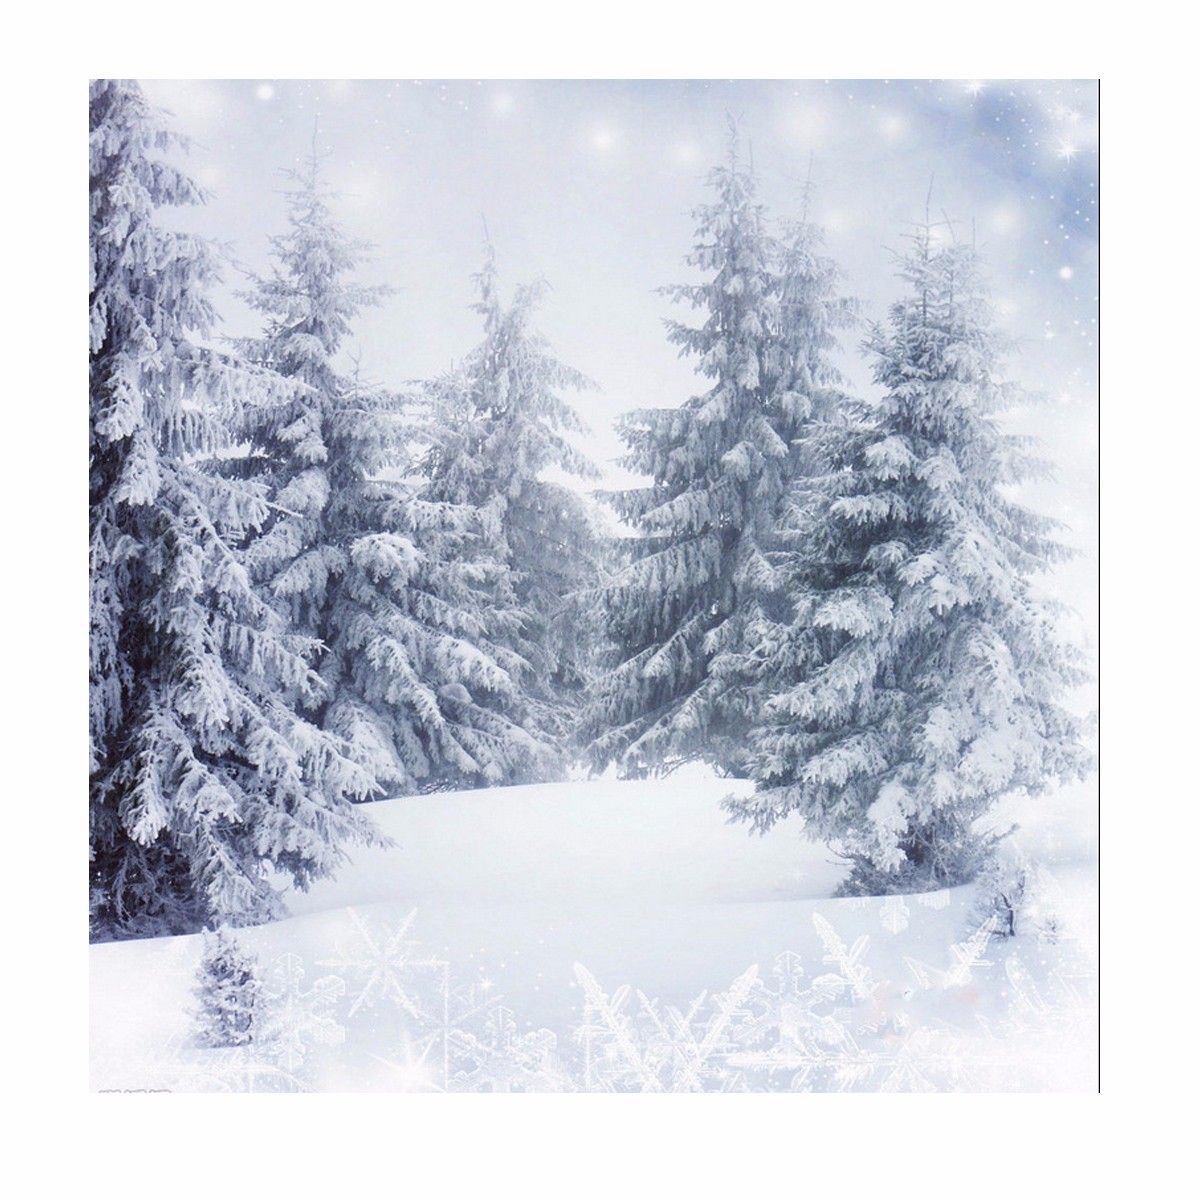 10x10FT-Vinyl-Winter-Snow-Lonely-Forest-Photography-Backdrop-Background-Studio-Prop-1387810